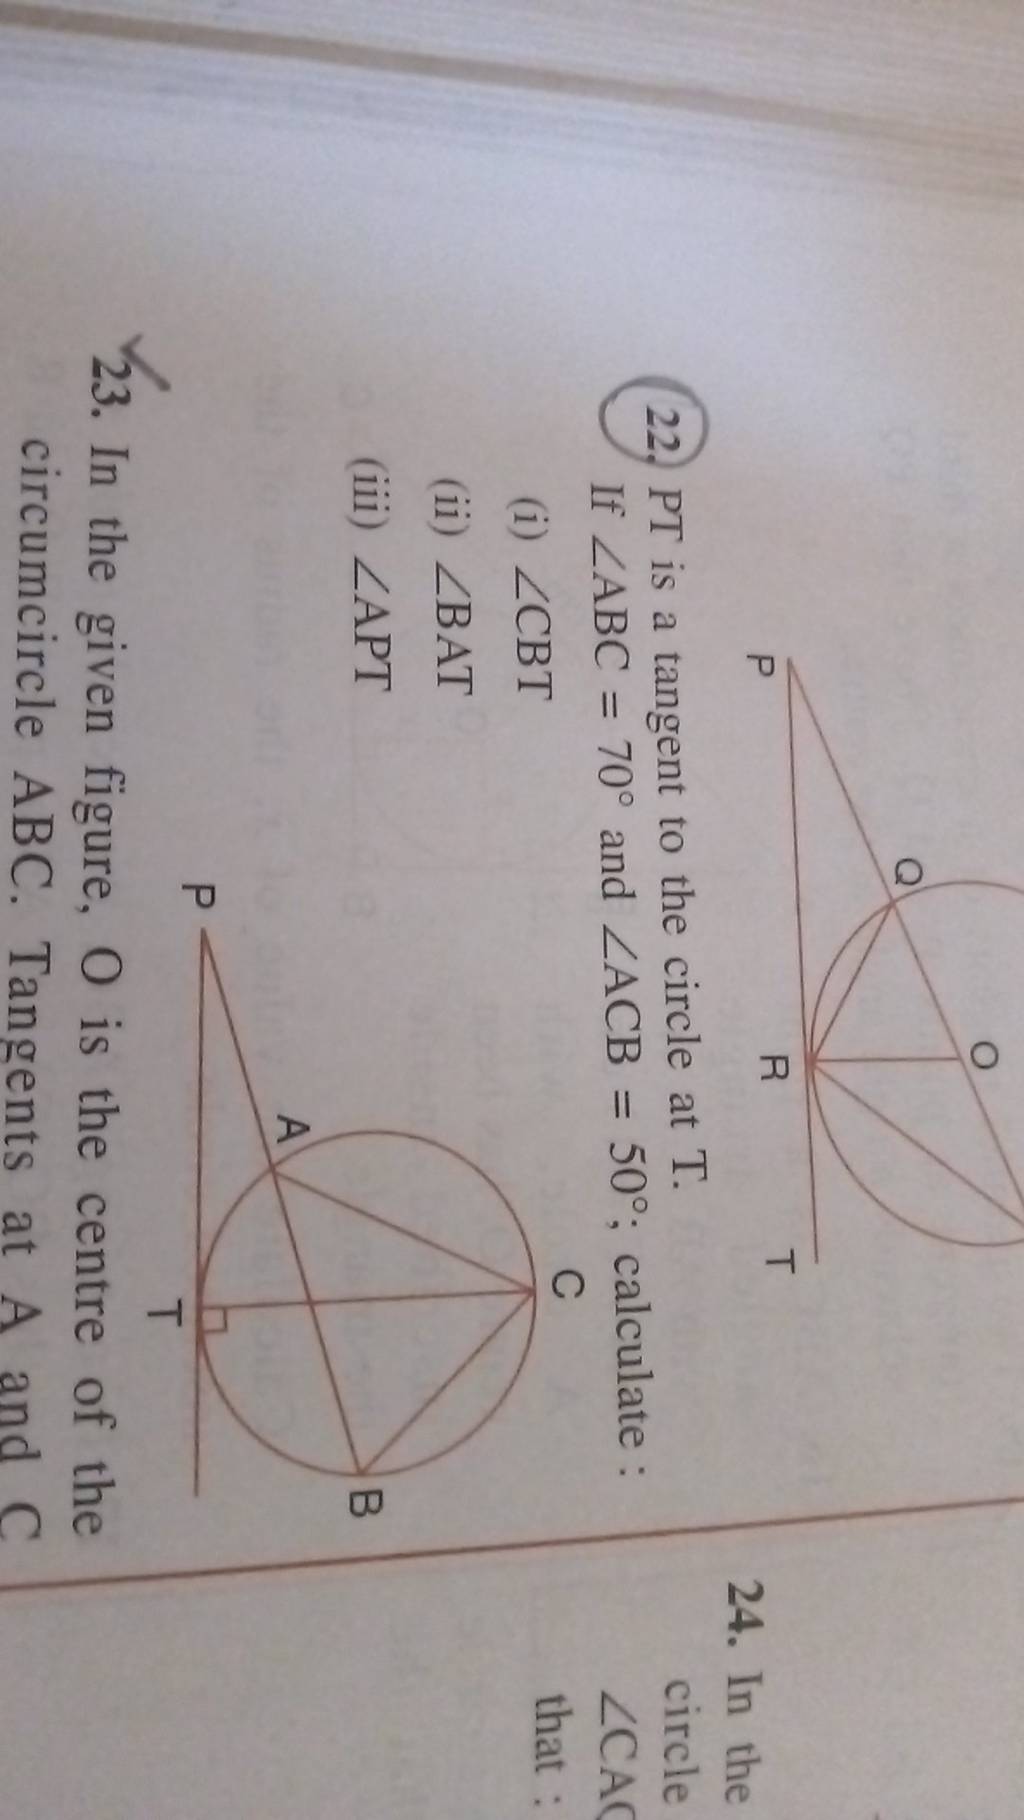 22. PT is a tangent to the circle at T. If ∠ABC=70∘ and ∠ACB=50∘; calc